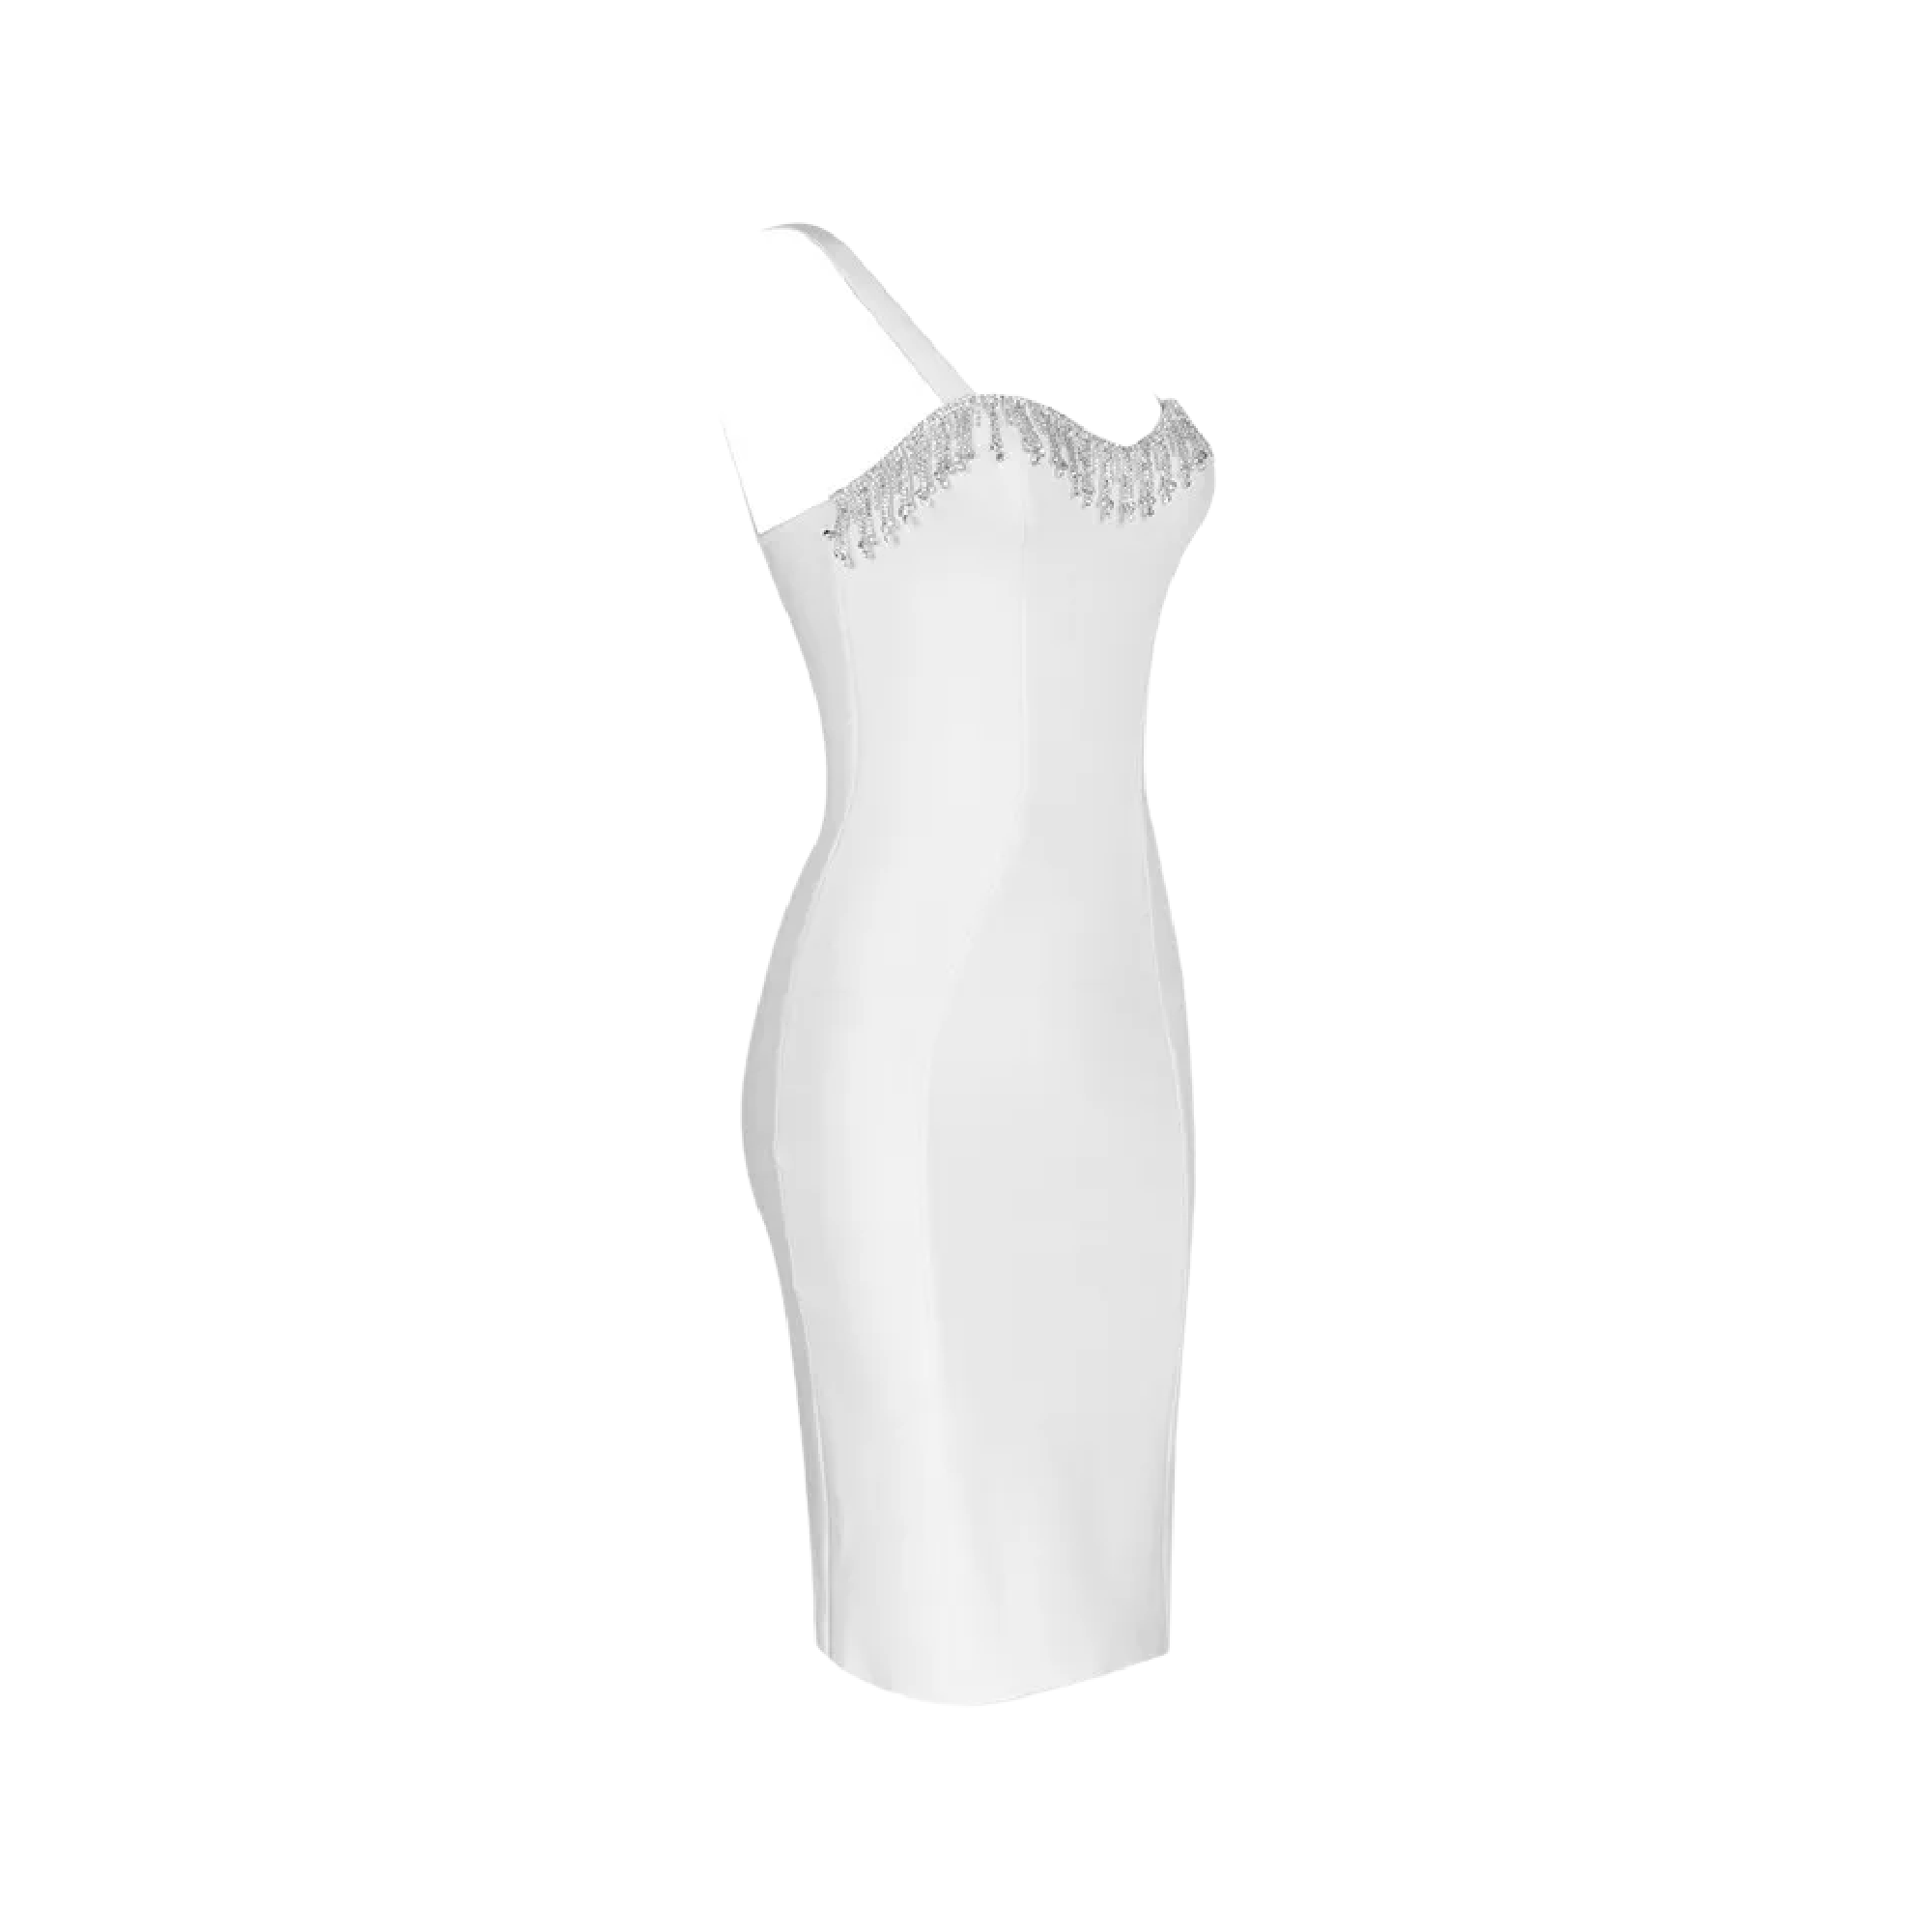 Félice crystal-trim bandage dress - itsy, it‘z different